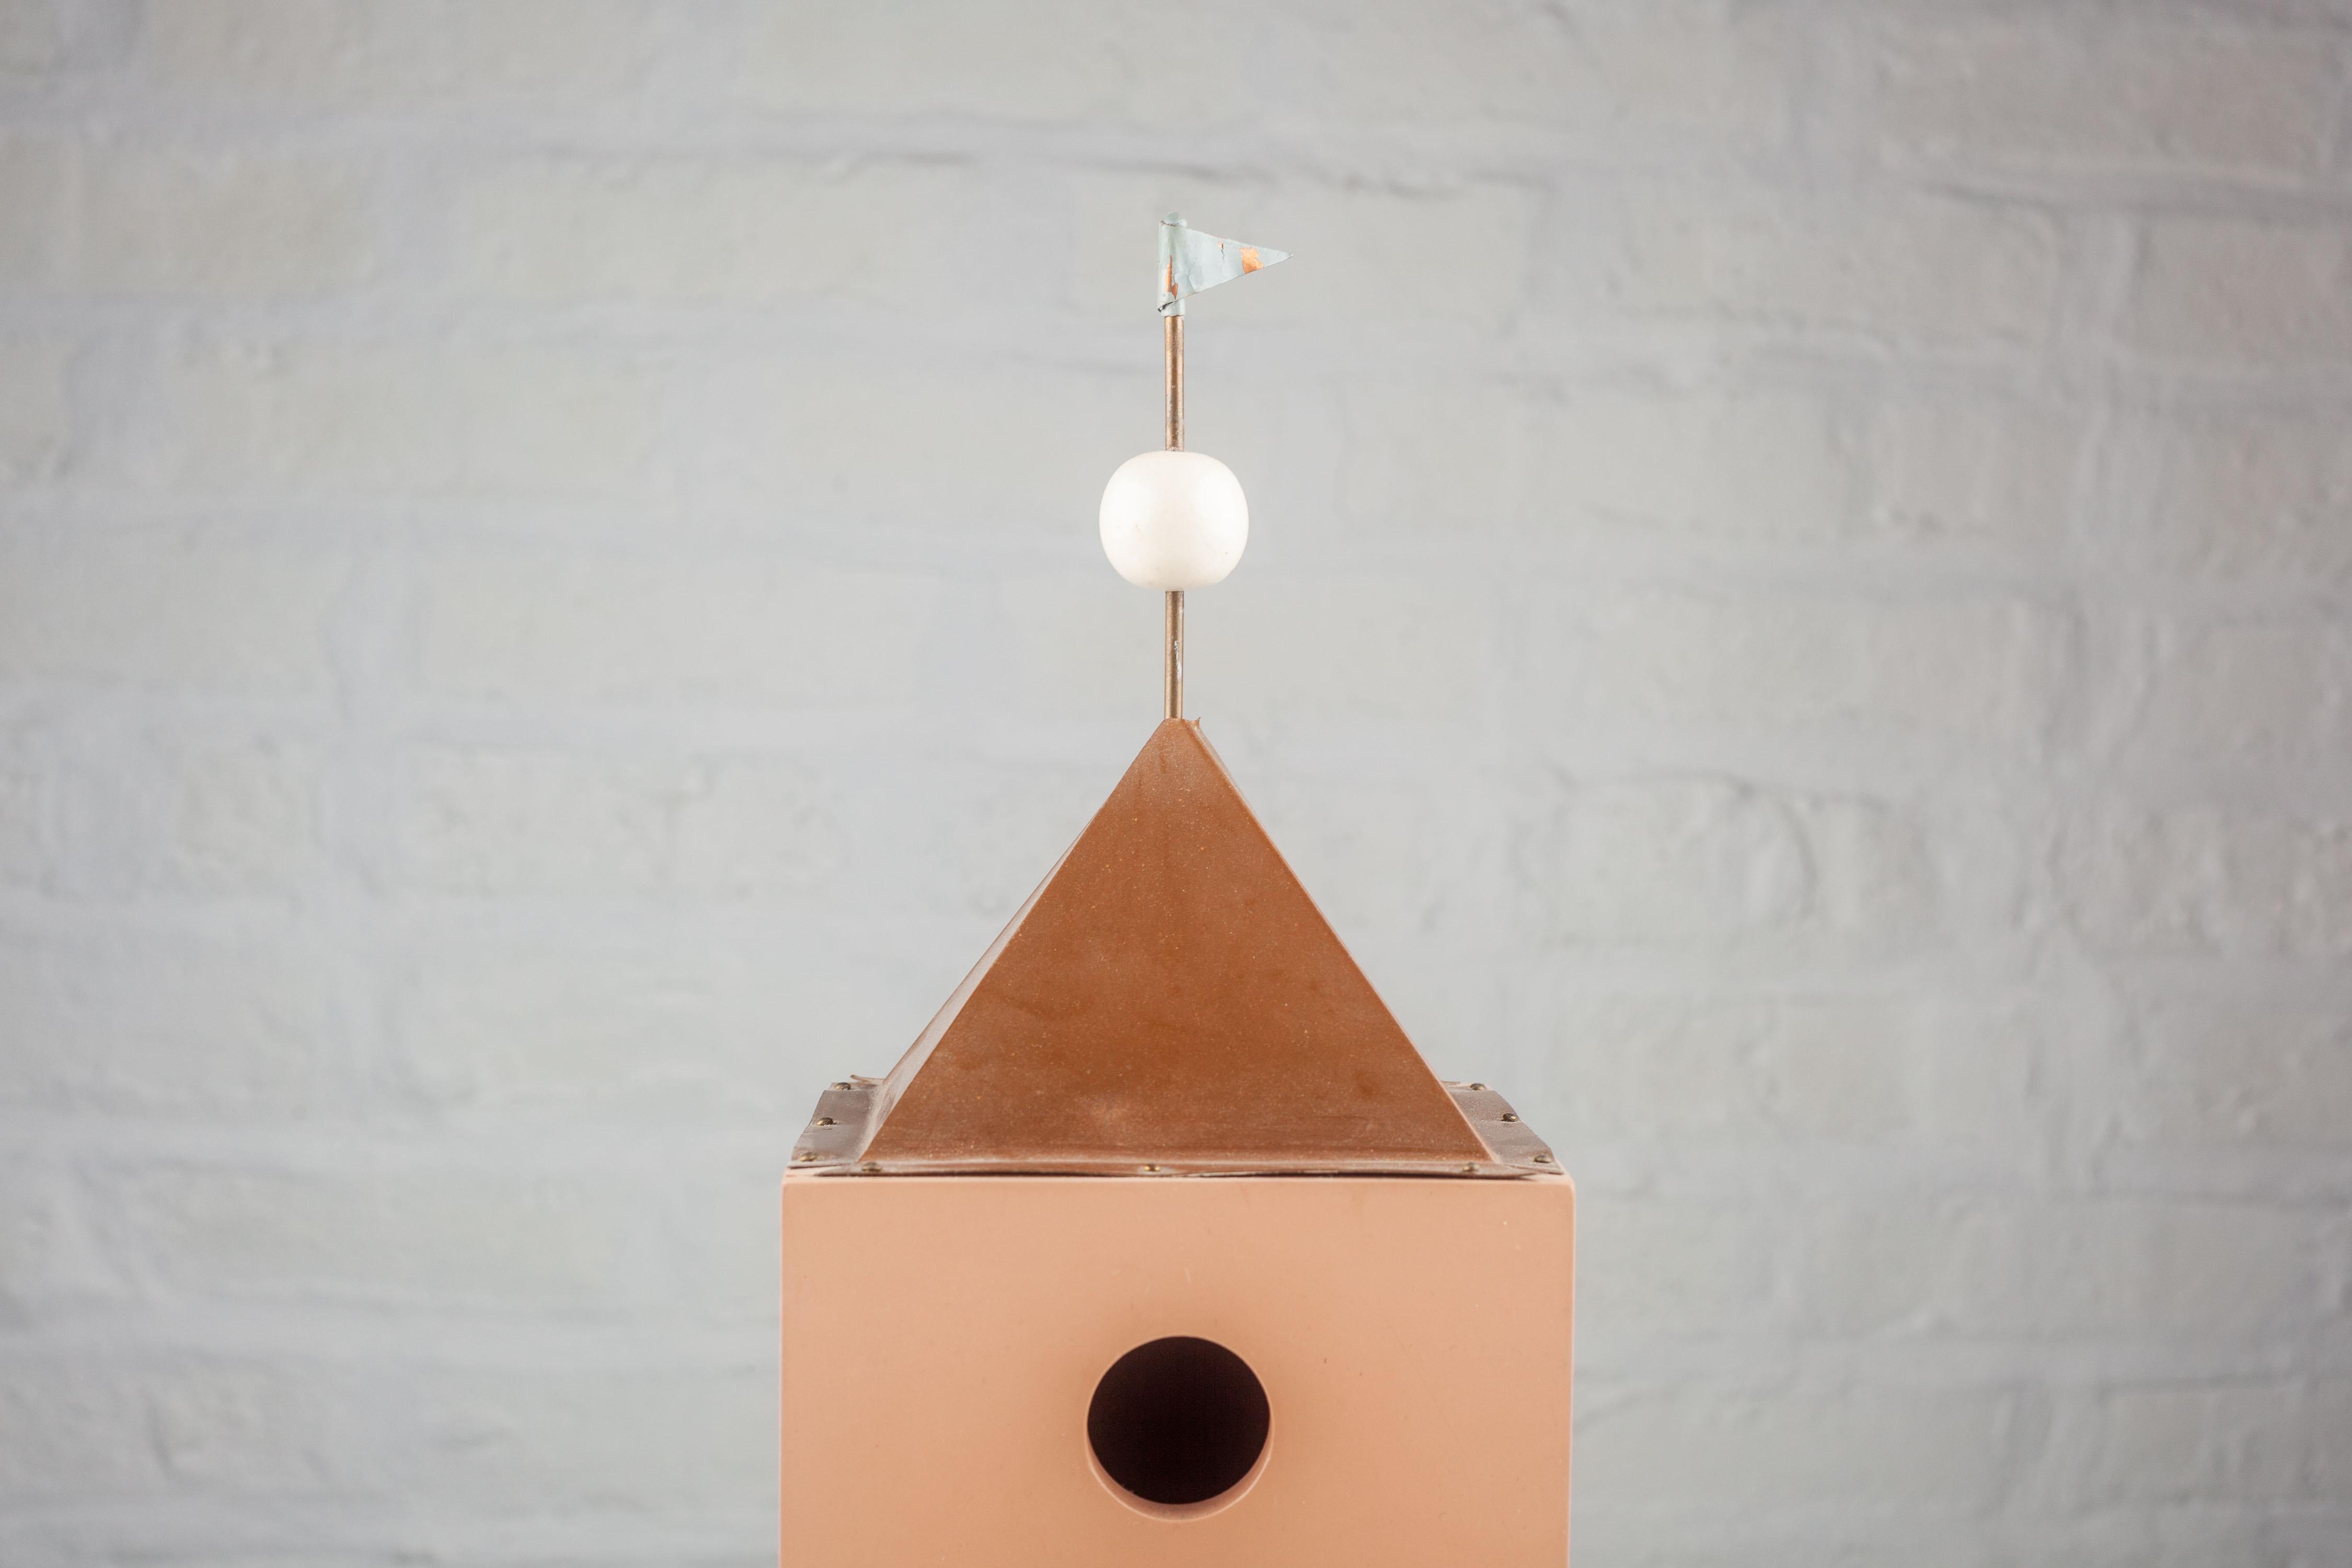 Crafted from painted wood, this architectural birdhouse sports a carefully chosen color palette that is both subtle and elegant, reflective of its time. It boasts a geometric cubic body, with a flat facade and crisp, clean lines that echo the